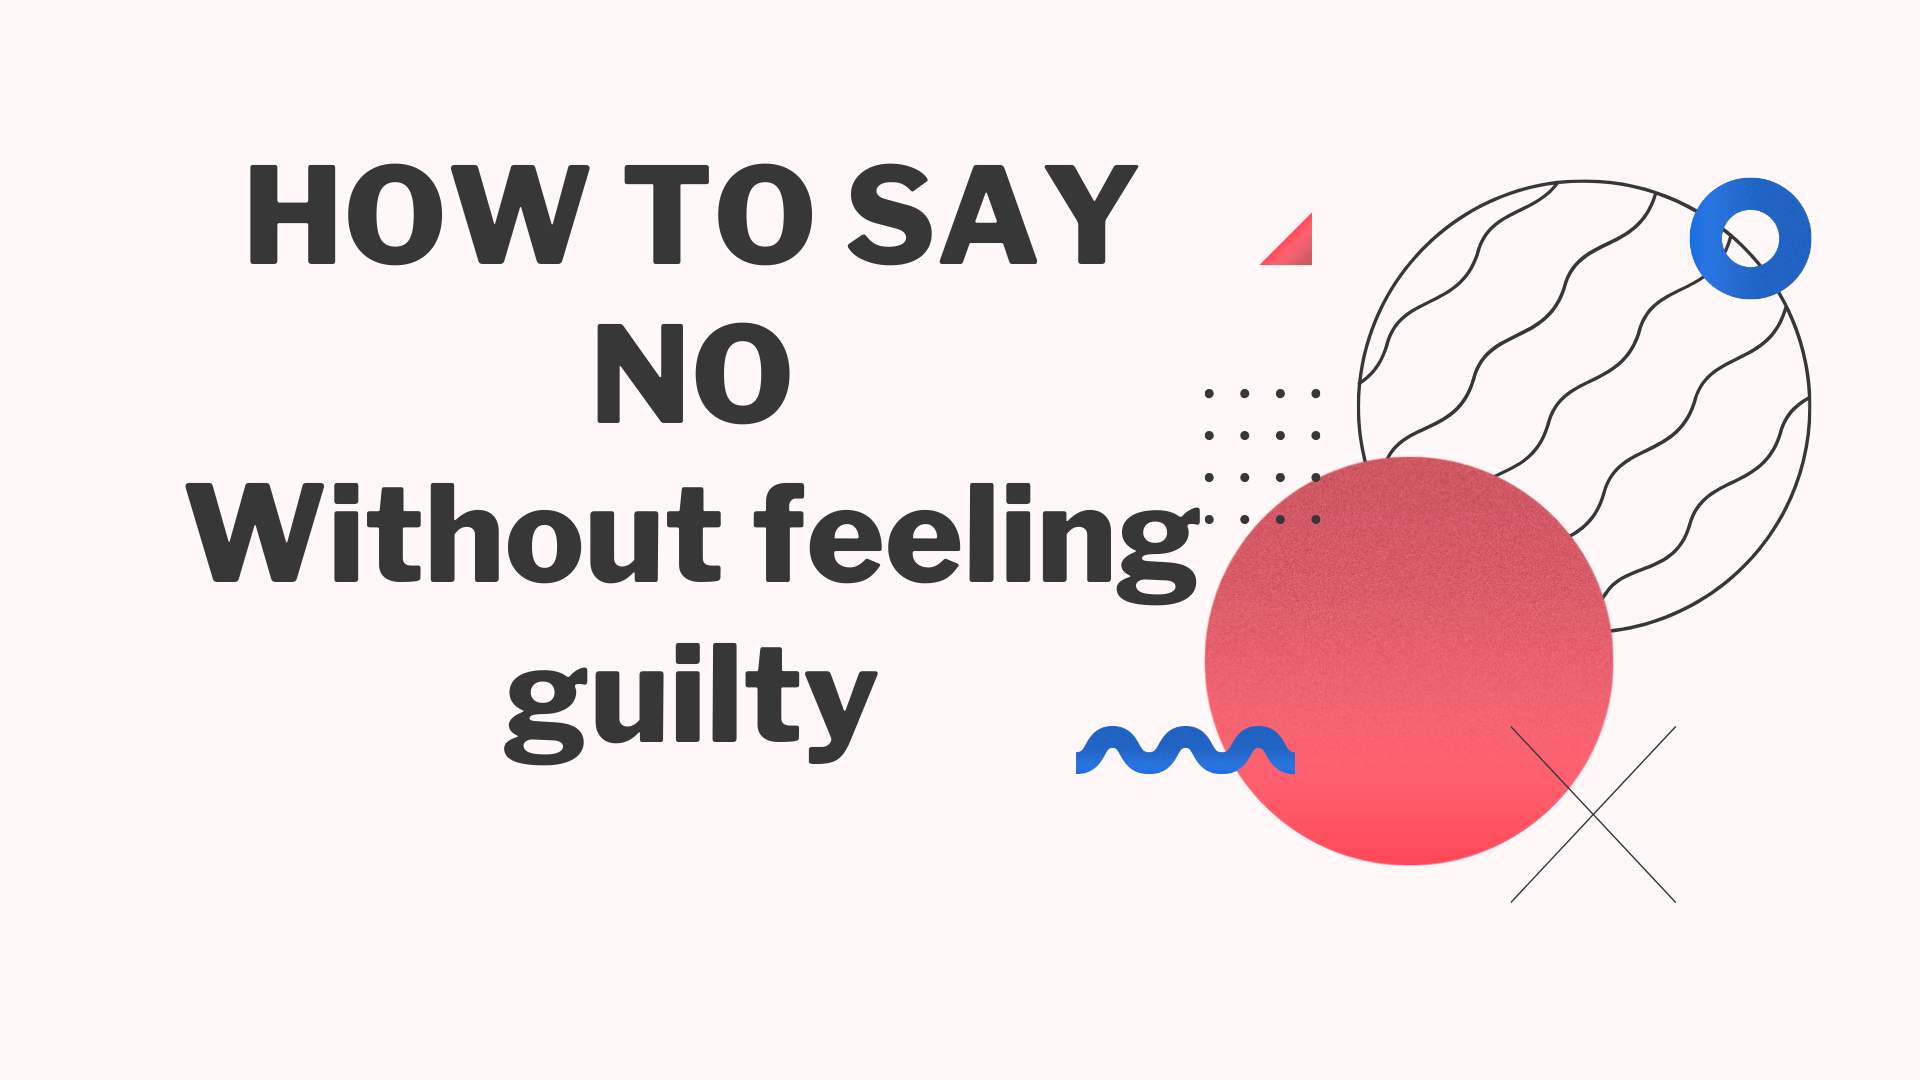 How to say no without feeling guilty banner